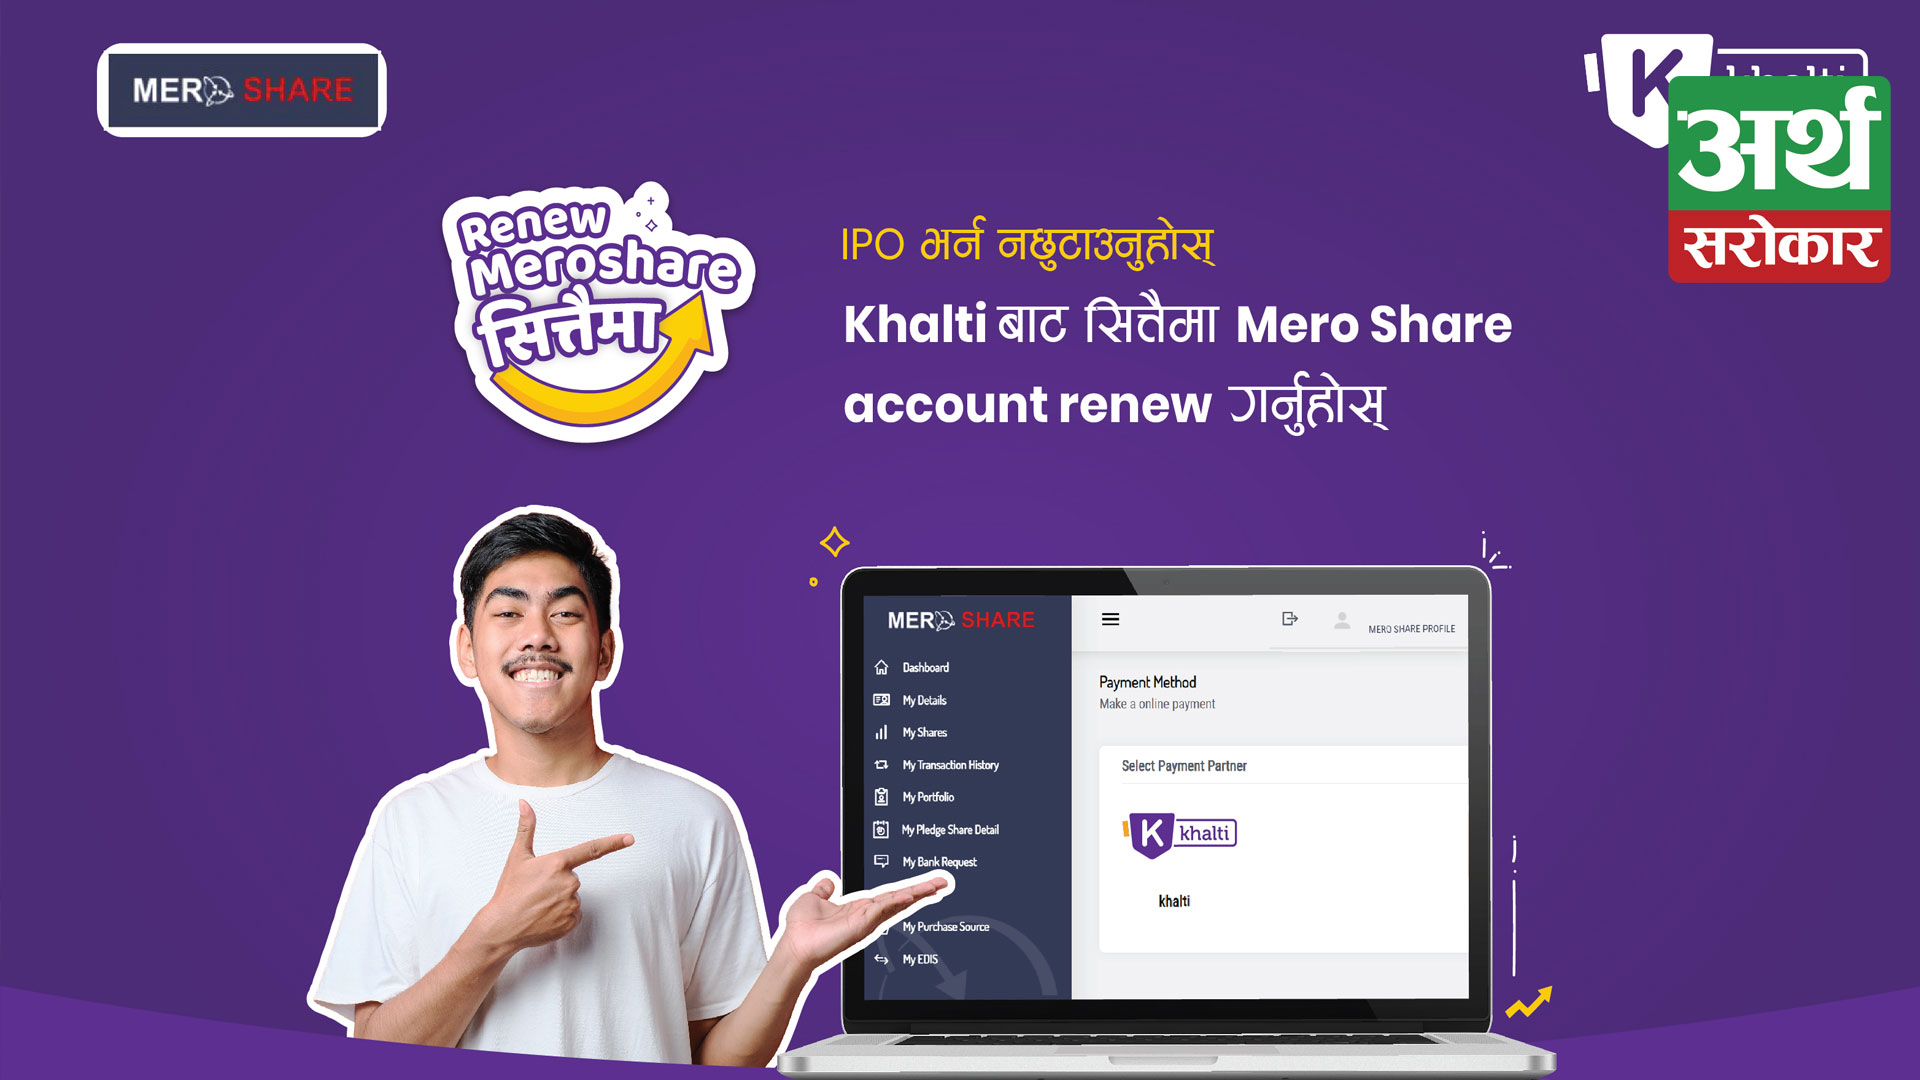 Renew Mero Share from Khalti for Free